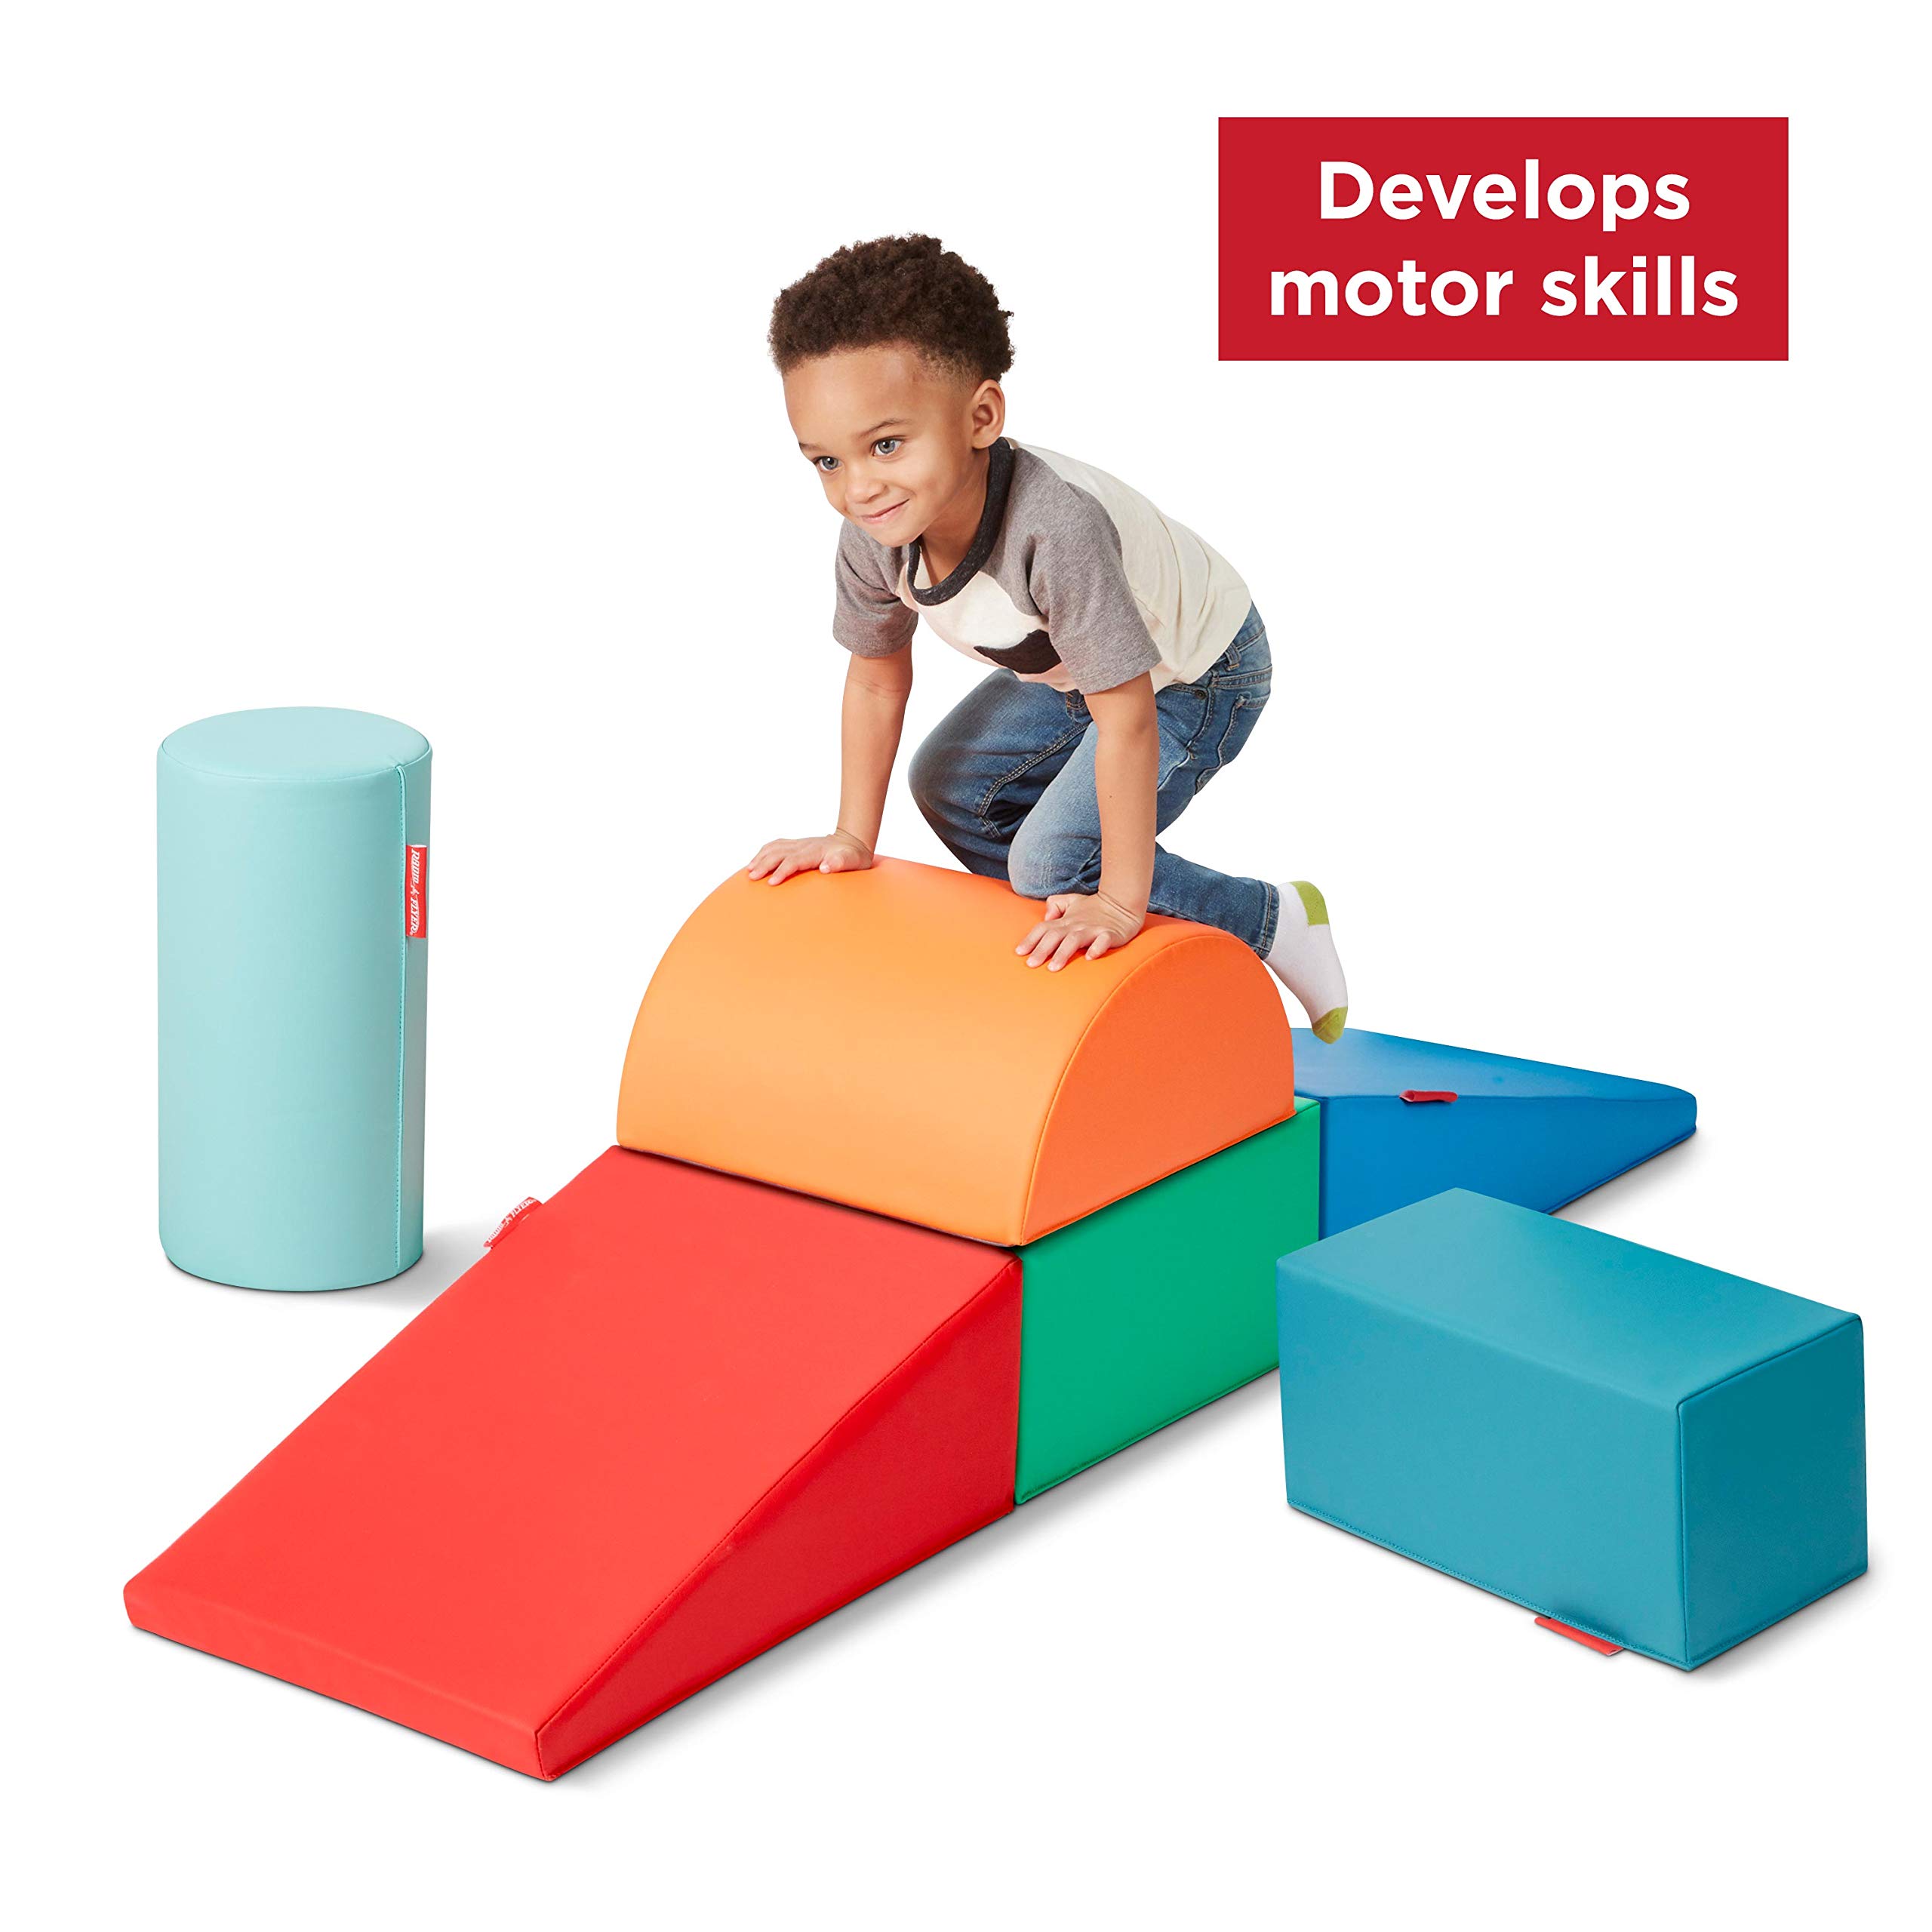 Radio Flyer Tumble Town Foam Blocks - Candy, Kids Indoor Climbers & Play Structure (Six Piece), Big Foam Climbing Blocks for Toddlers Ages 9 Months - 3 Years